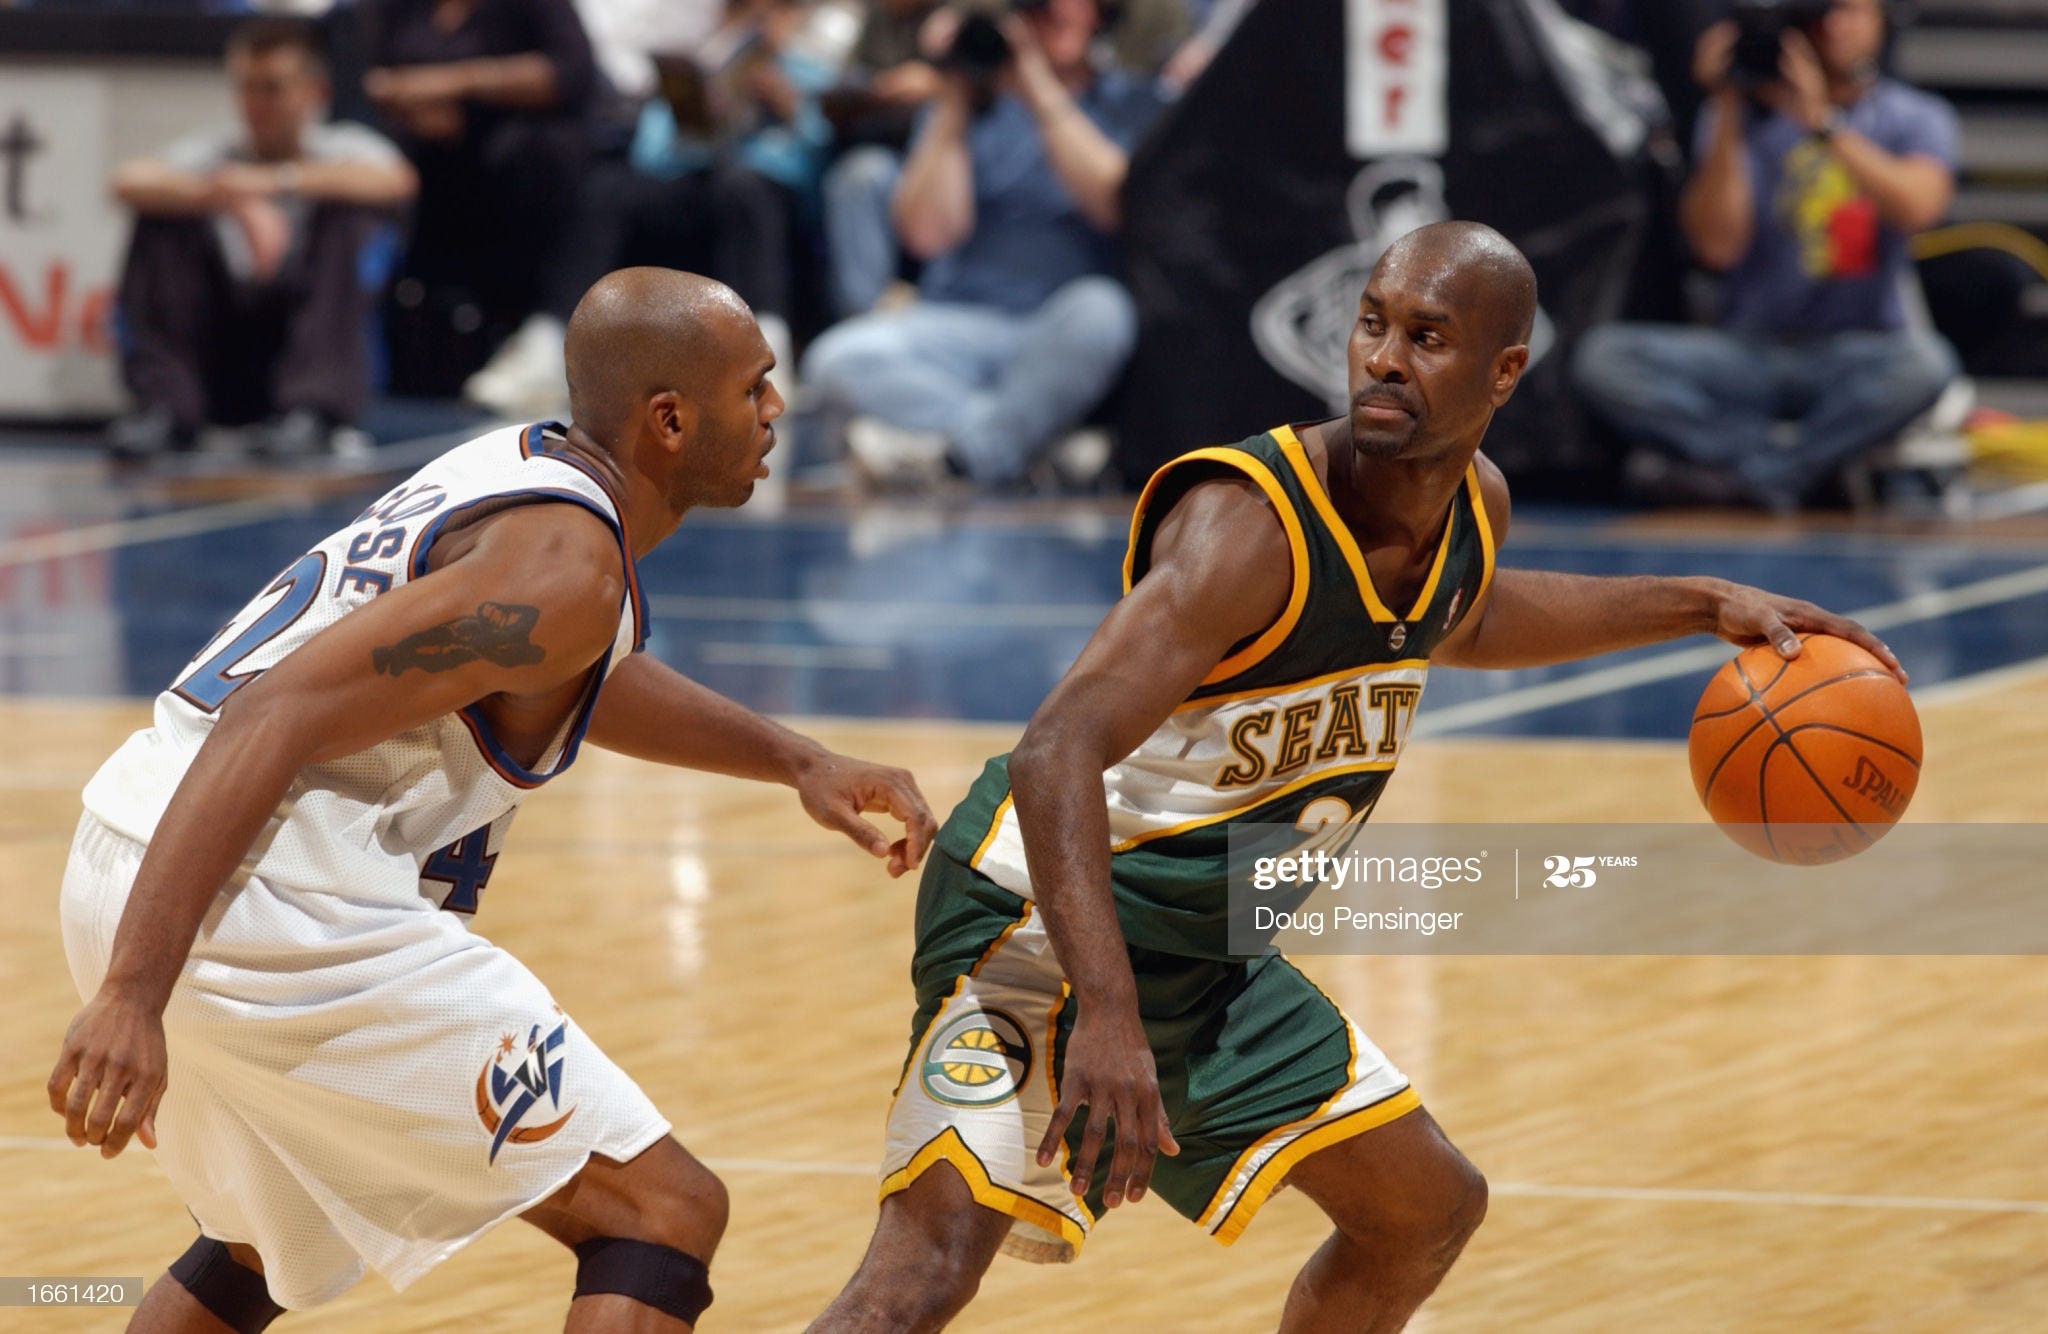 RJP: Indiana Pacers - by Curtis M. Harris - ProHoopsHistory